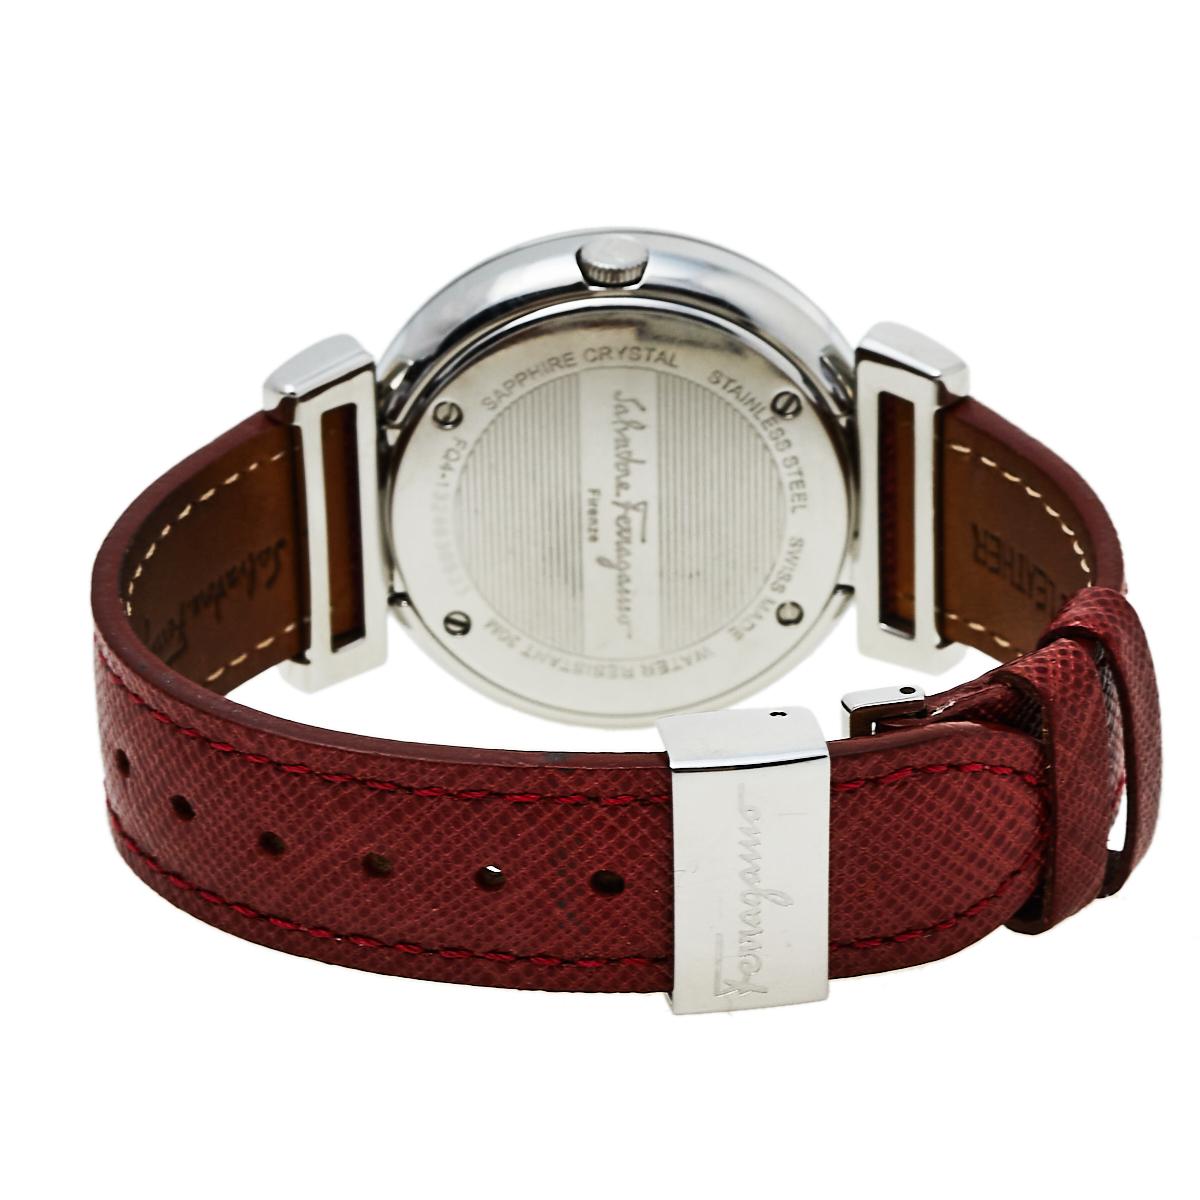 Elegant design and subtle aesthetics define this Quartz watch from the house of Salvatore Ferragamo. It is rendered beautifully in a stainless steel case and held by red leather straps. The efficient accessory has been assembled with precision and